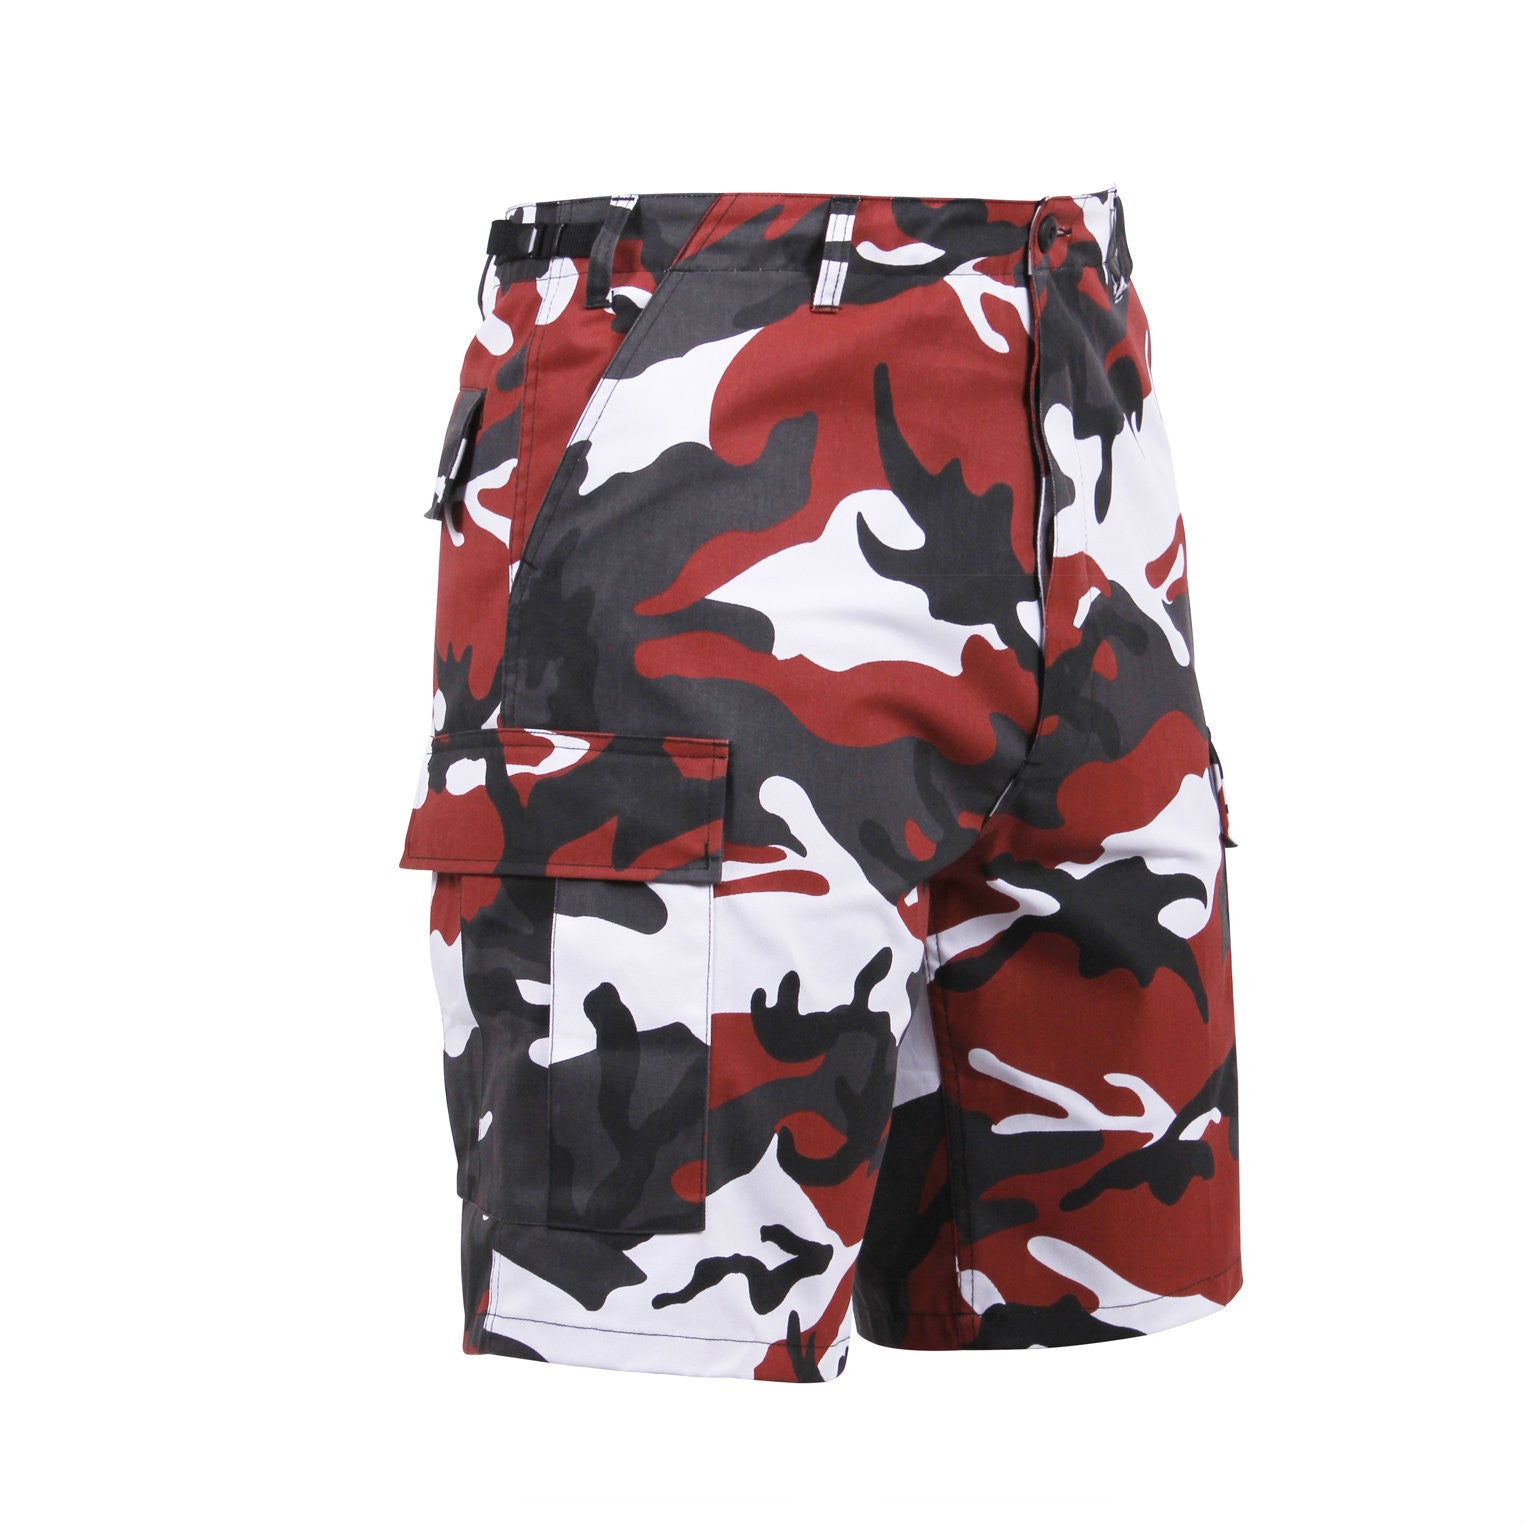 Red Camouflage BDU Shorts